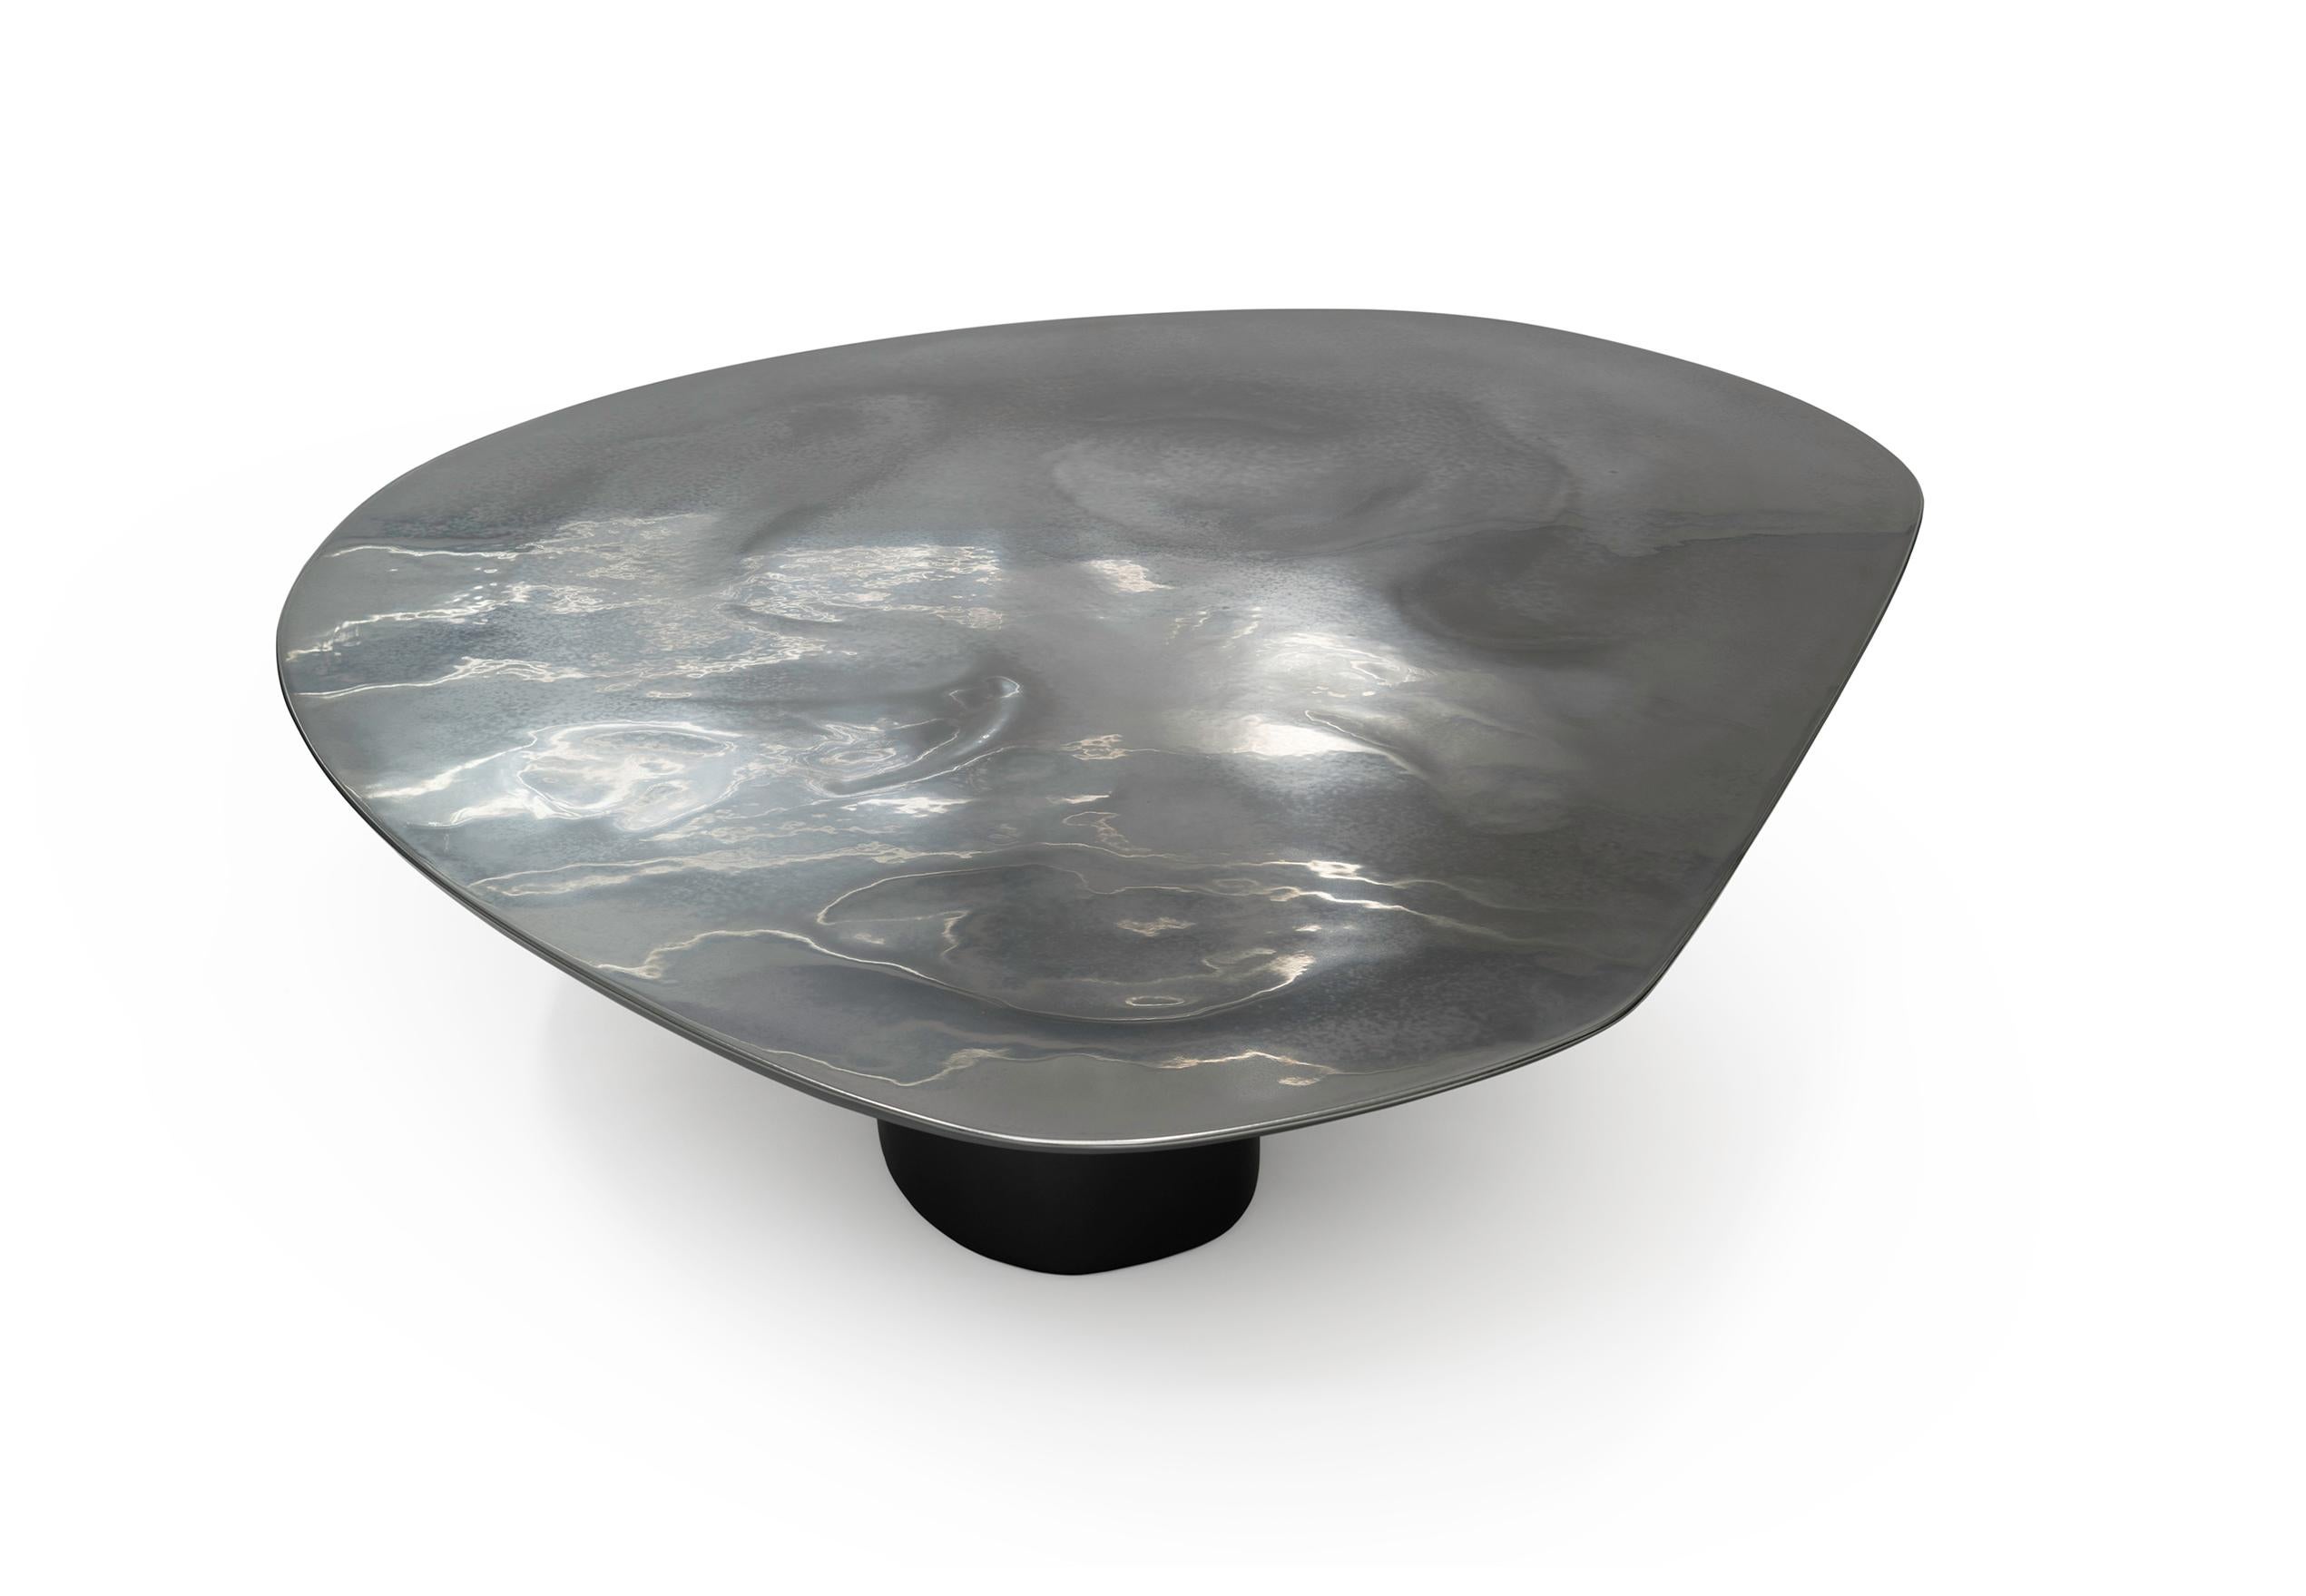 NR LOW, 21st century modern sculptural circular silver black coffee table

The highly edge intuitively shaped low table possess the touch of lack of gravity. The tabletop and base constitution convey the impression being a contradiction to the all